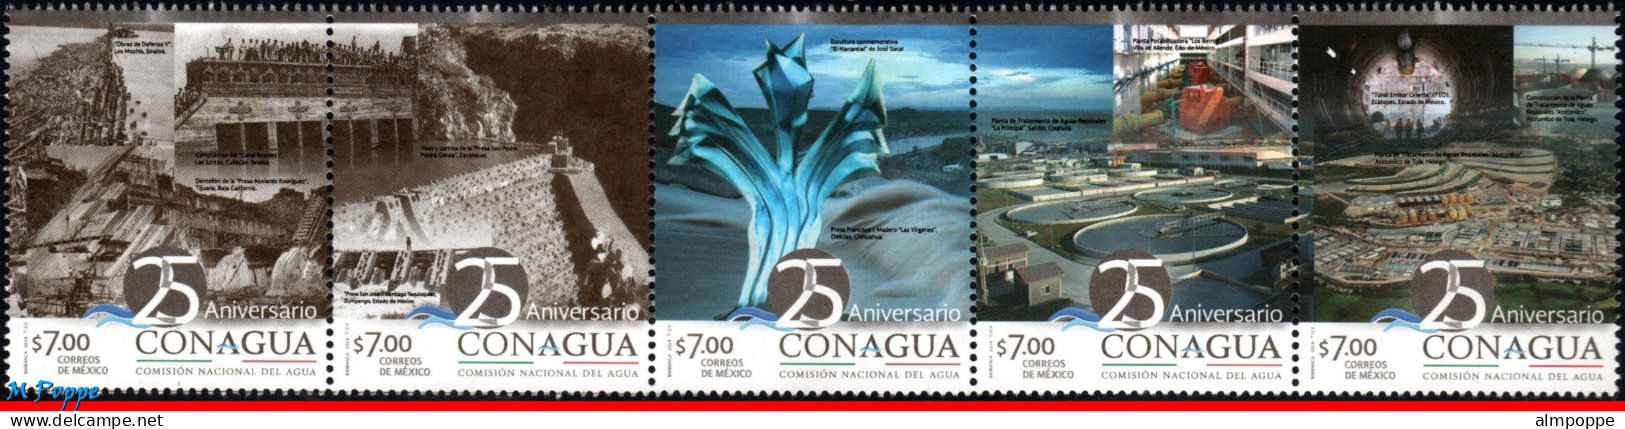 Ref. MX-2859 MEXICO 2014 - CONAGUA, 25TH ANNIV., NTLWATER COMMISSION, WATER DAMS, SET MNH, INDUSTRY 5V Sc# 2859 - Water